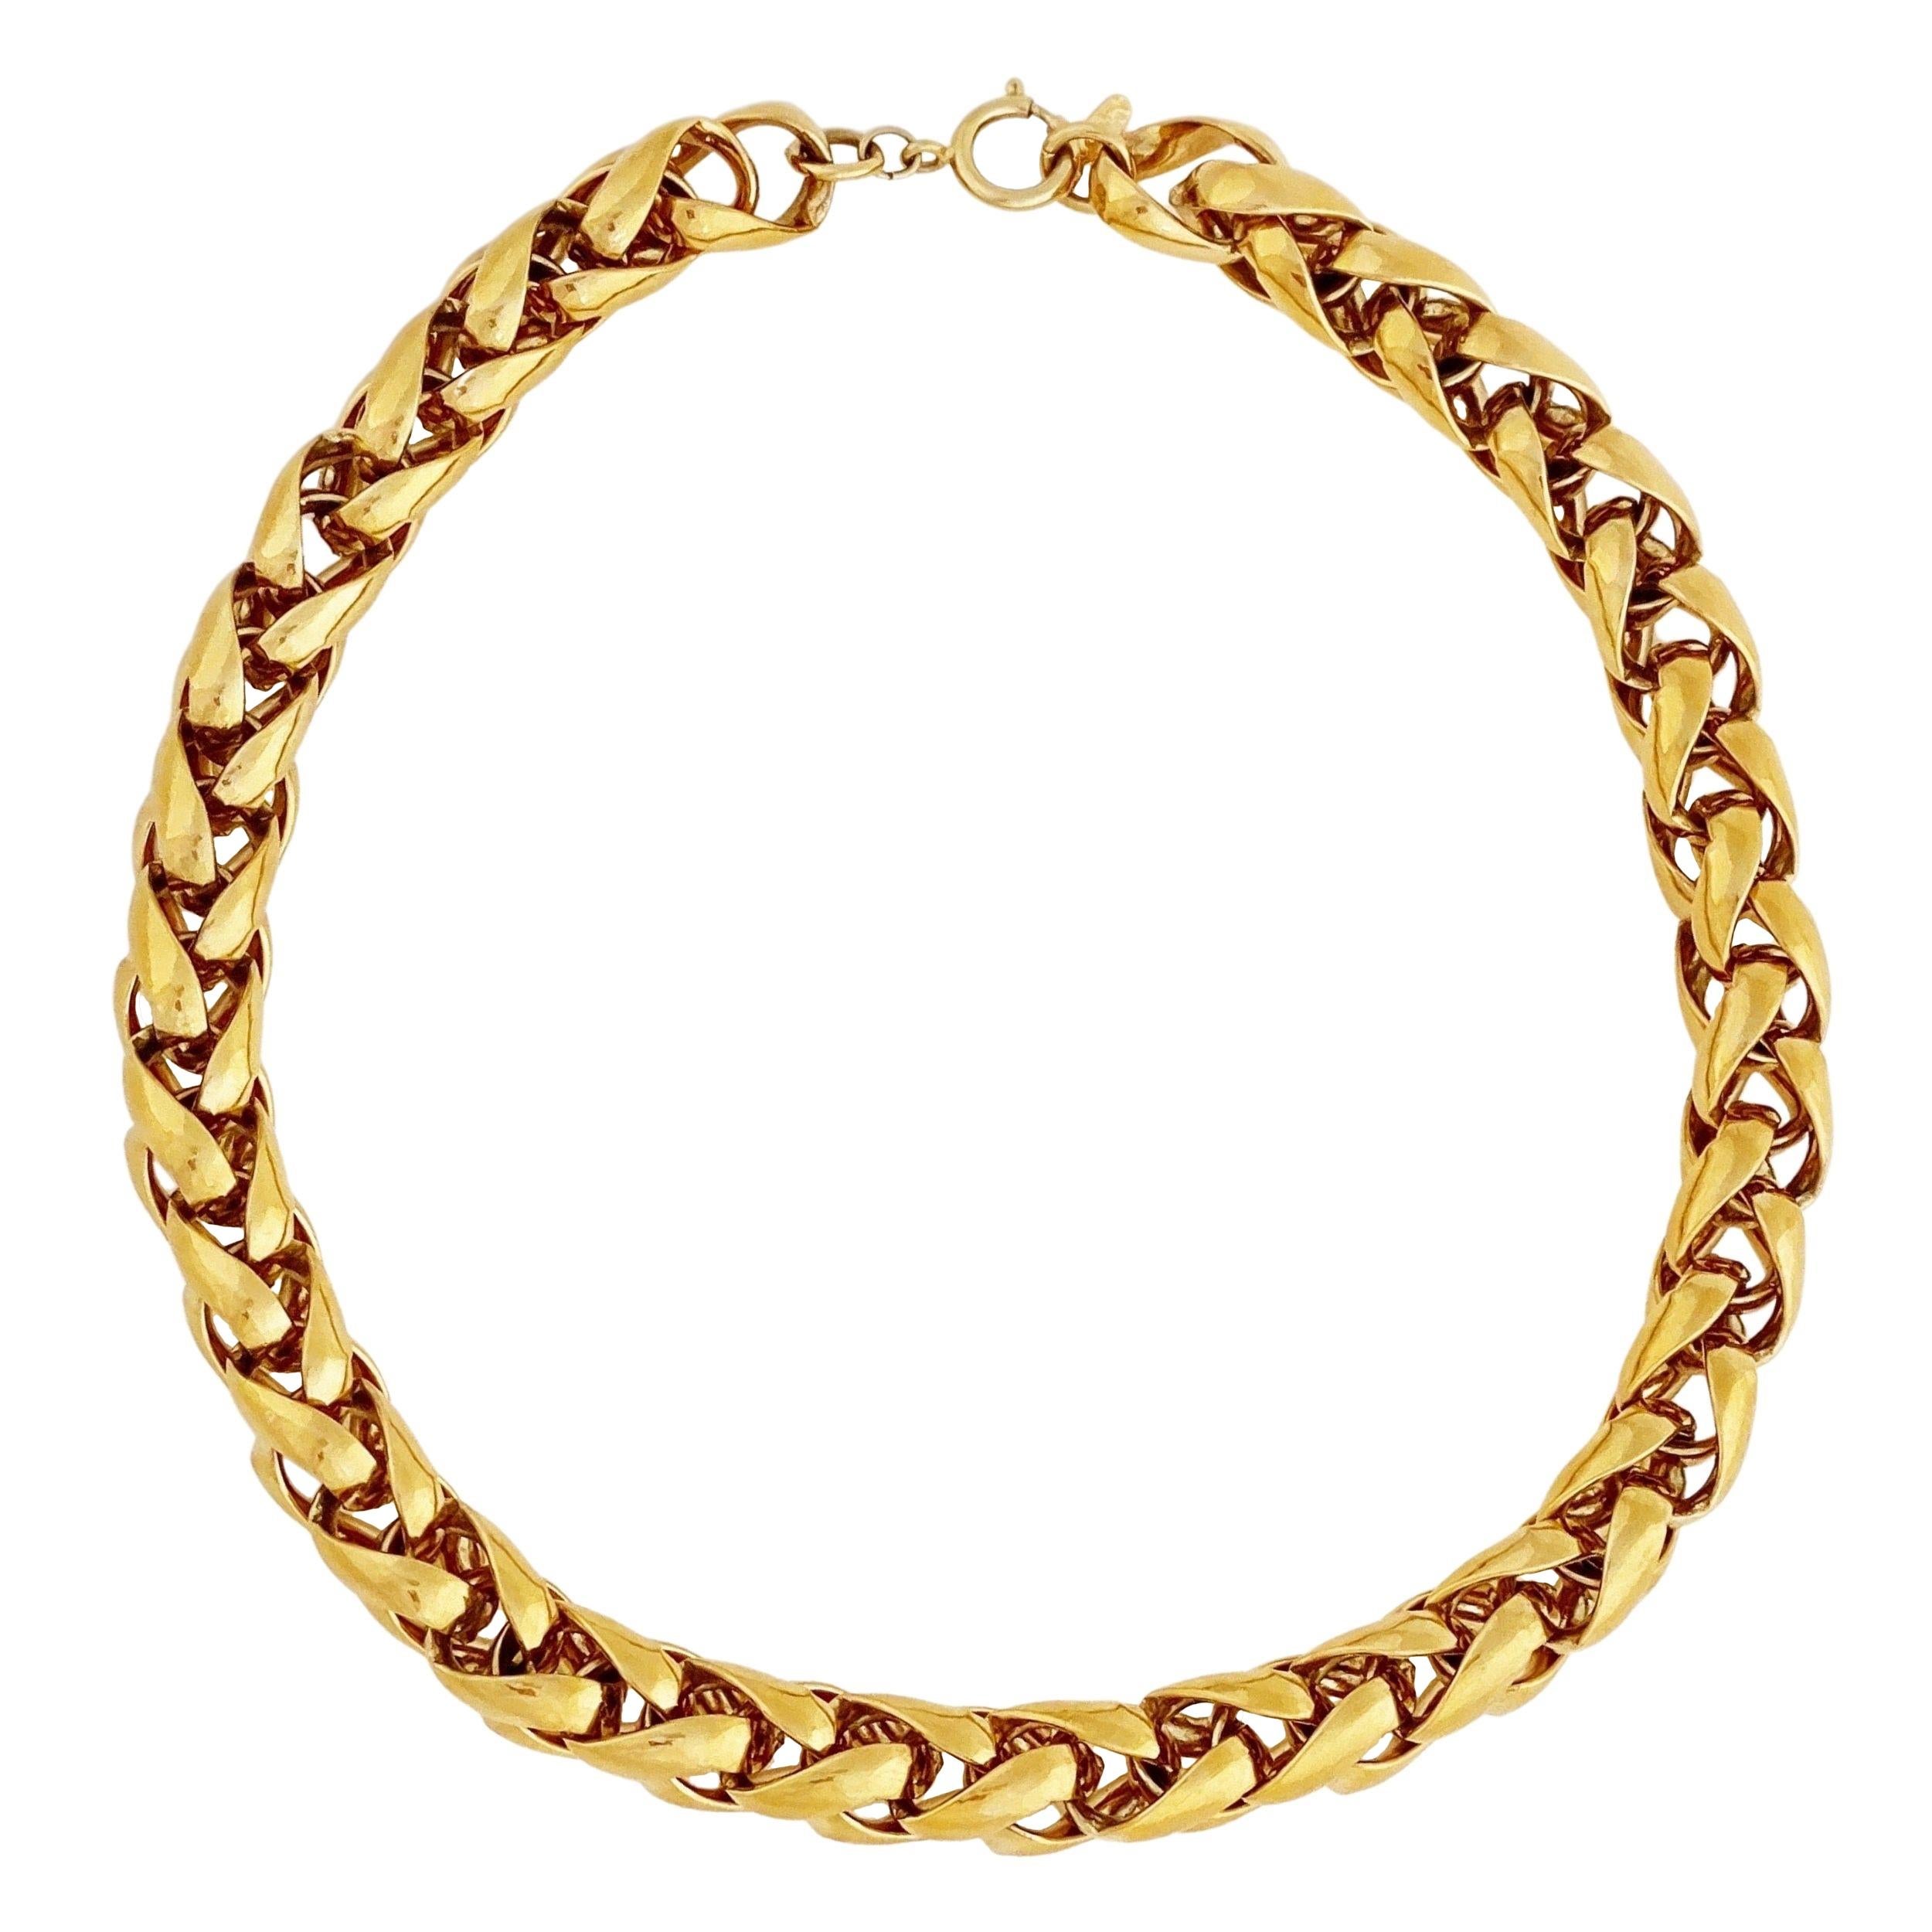 Gold Chunky Woven Chain Necklace By Napier, 1980s